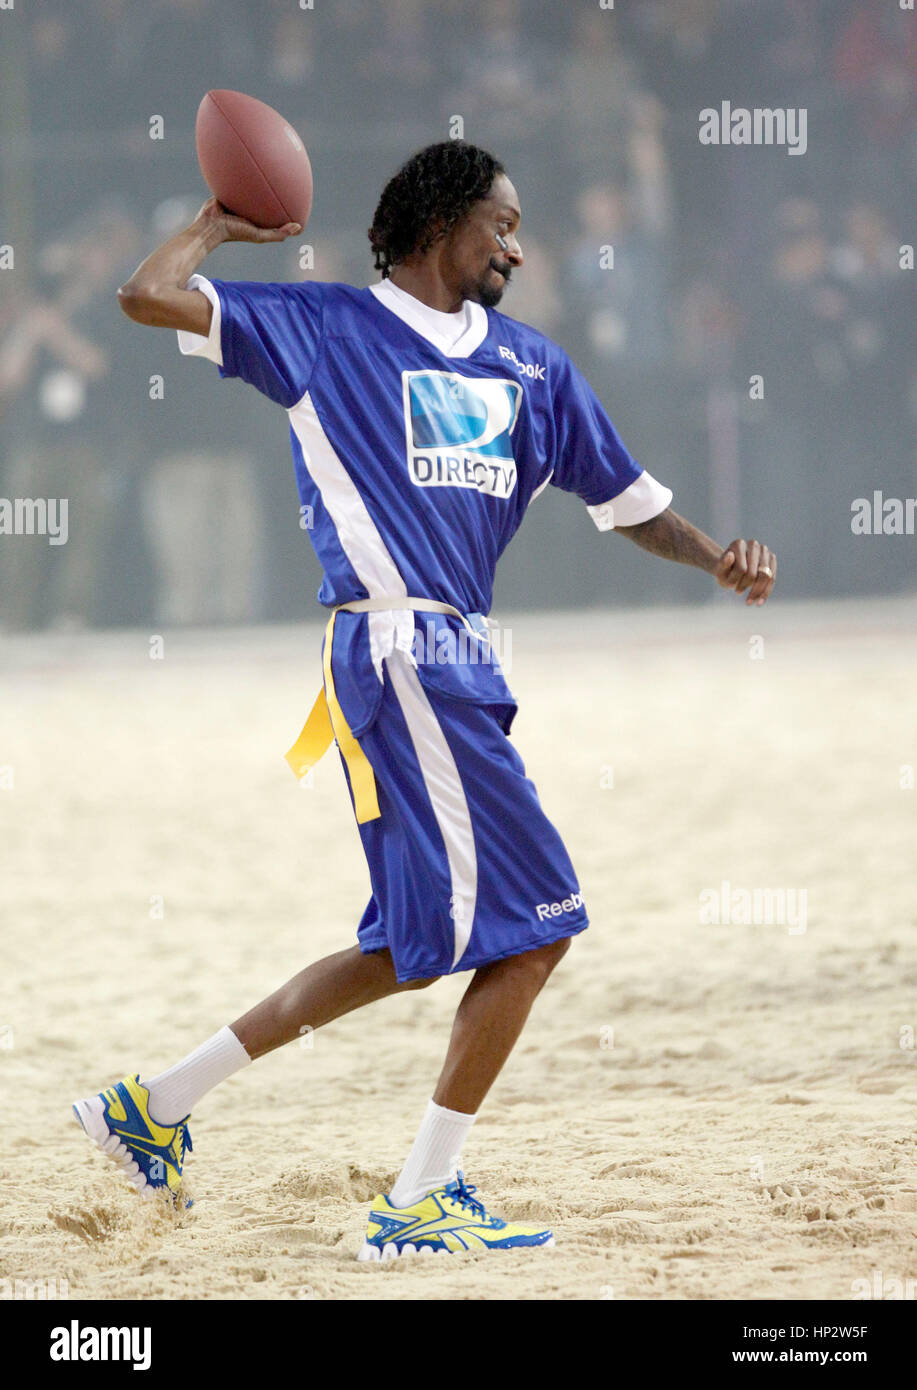 Snoop Dogg throws a football at Directv's Sixth Annual Celebrity Beach Bowl in Indianapolis, Indiana on February 4, 2012. Photo by Francis Specker Stock Photo